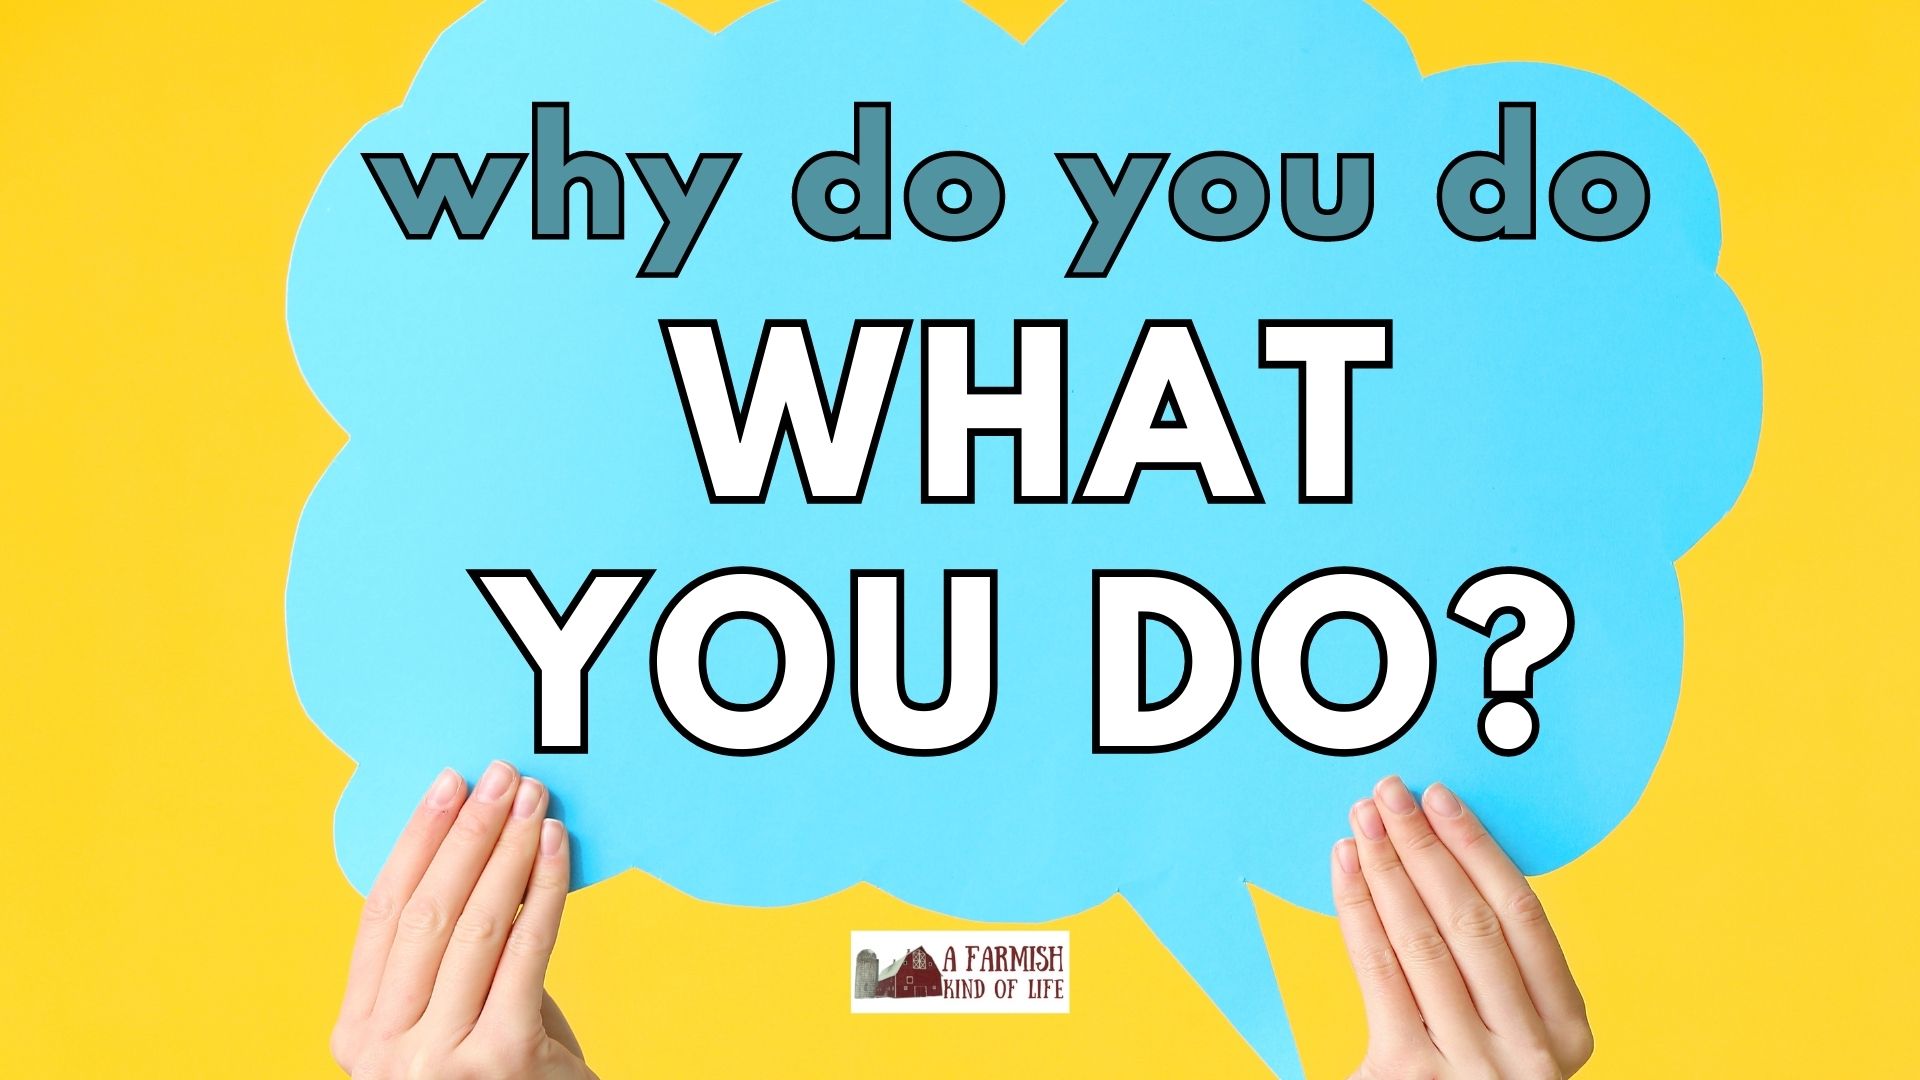 241: Why do you do it?